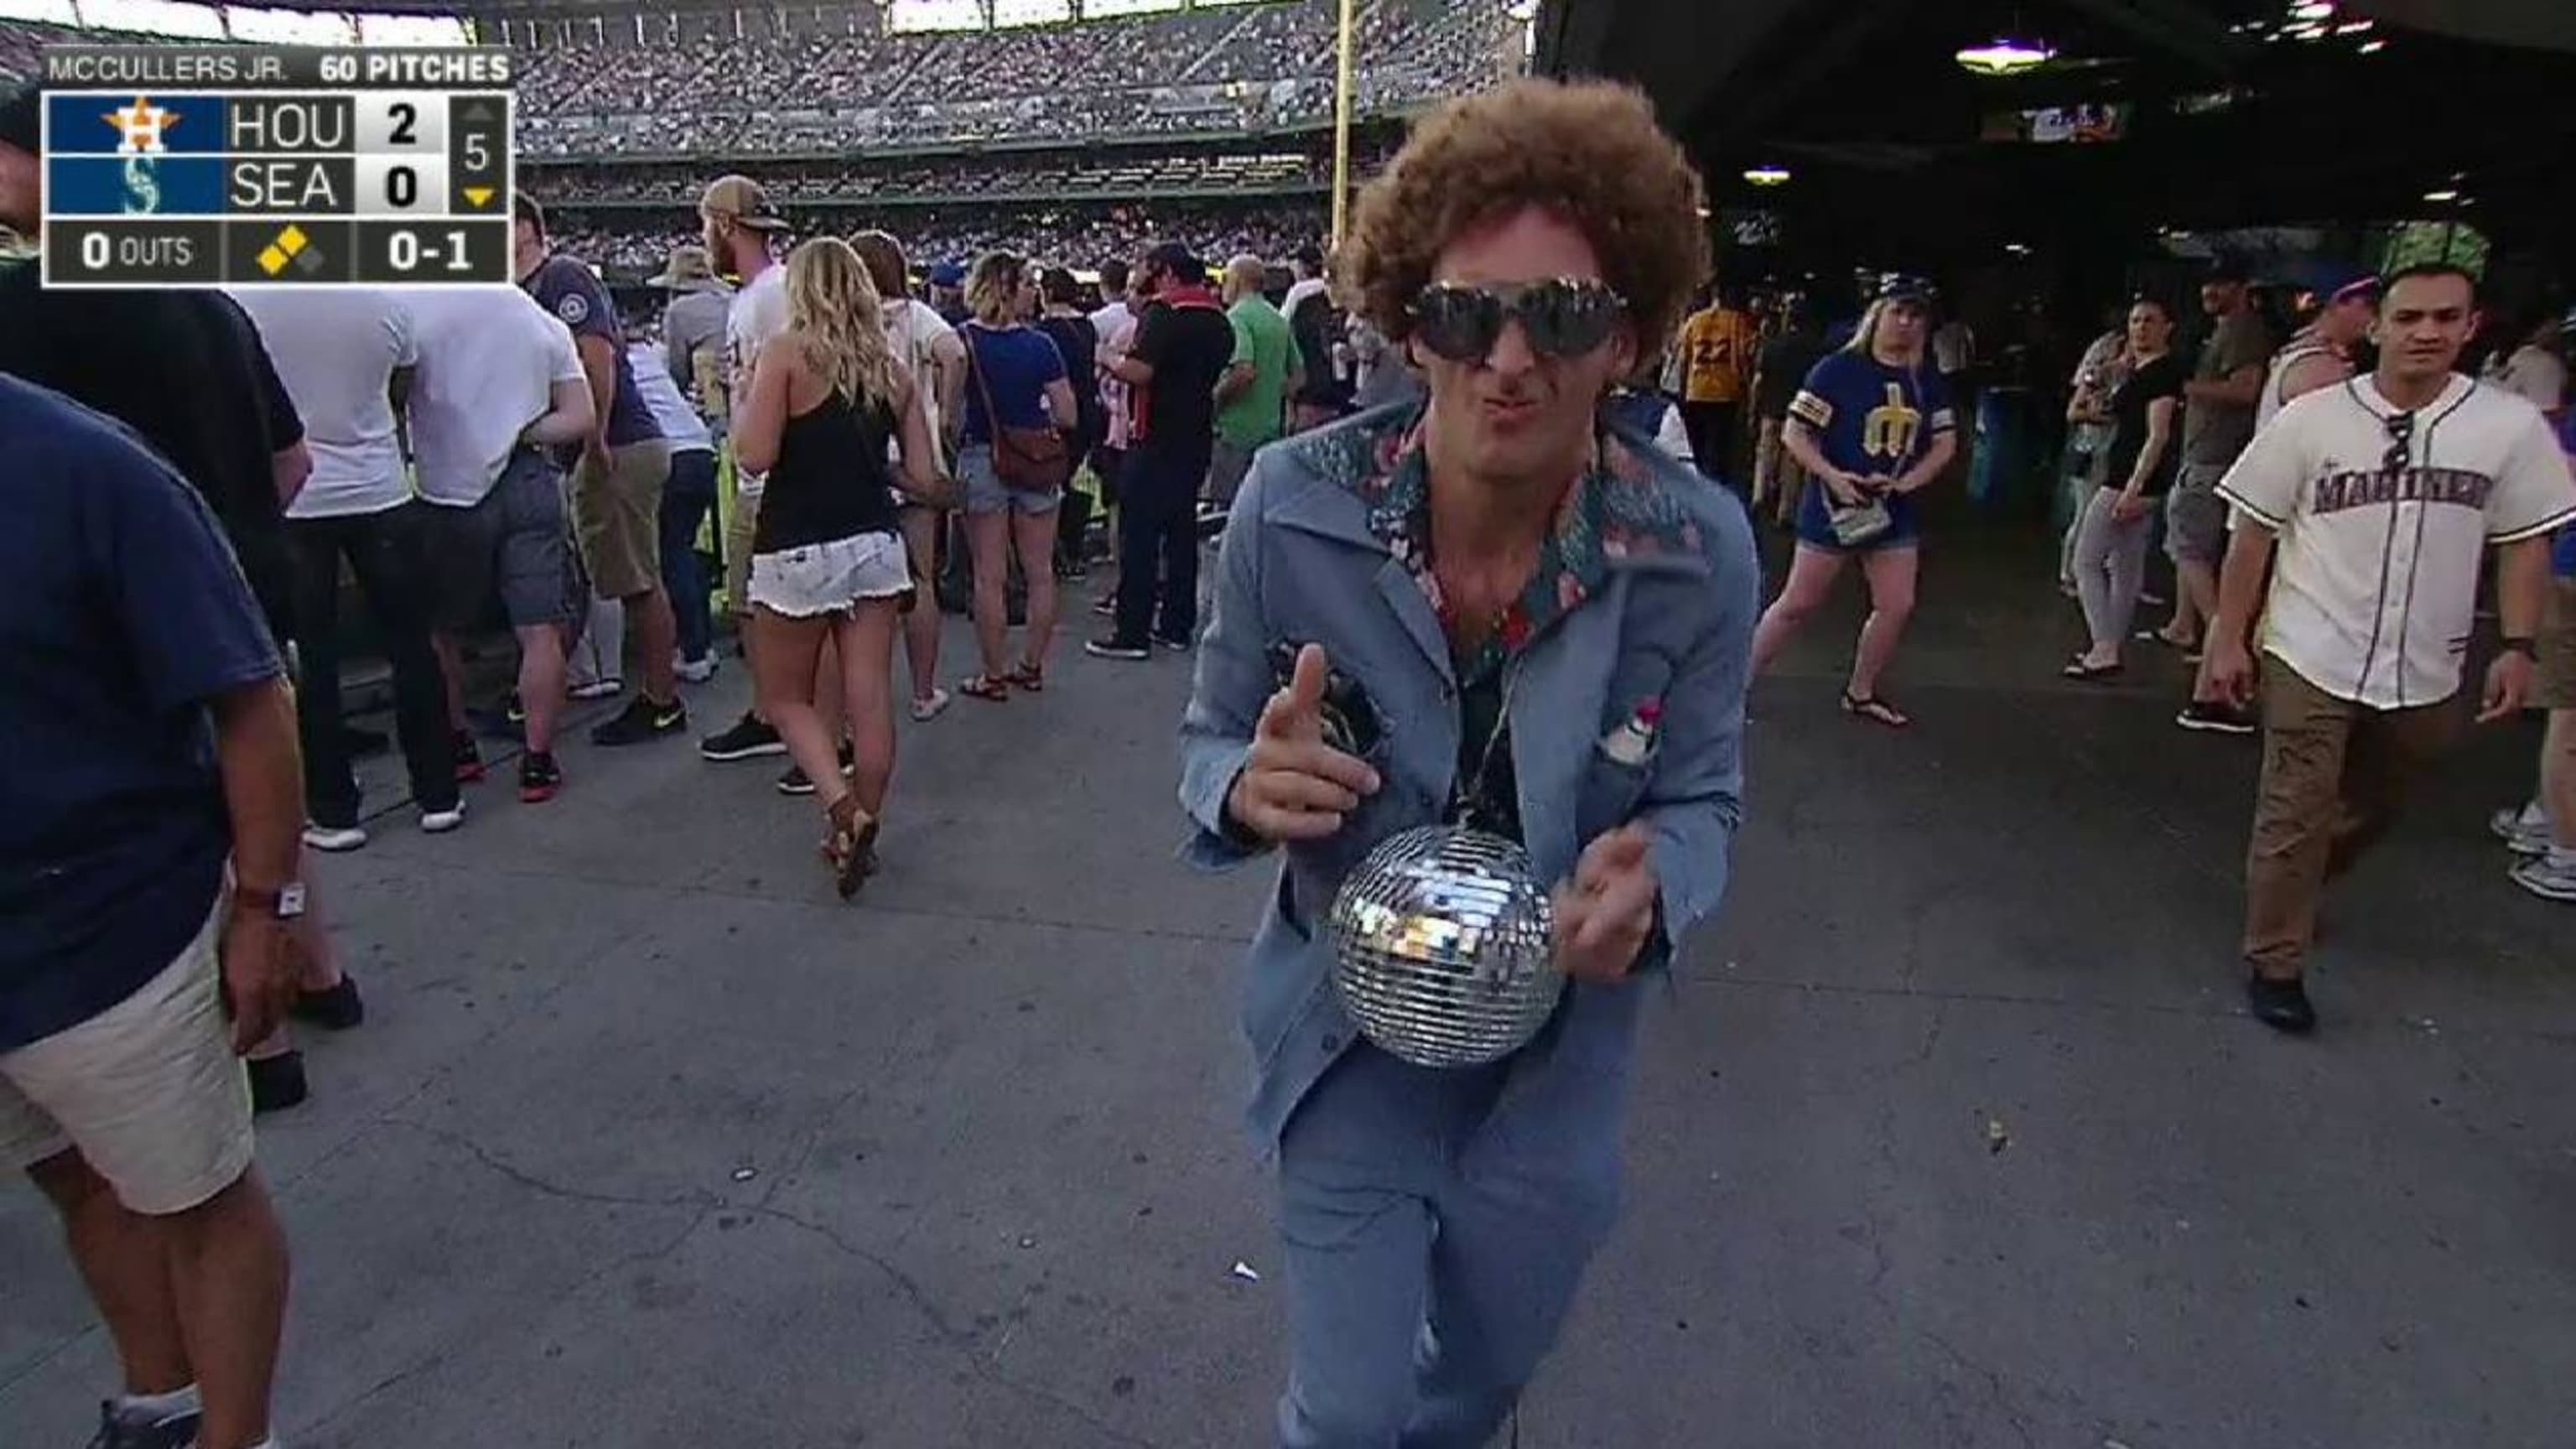 Mariners 'Turn Back the Clock Night' brought some old school disco